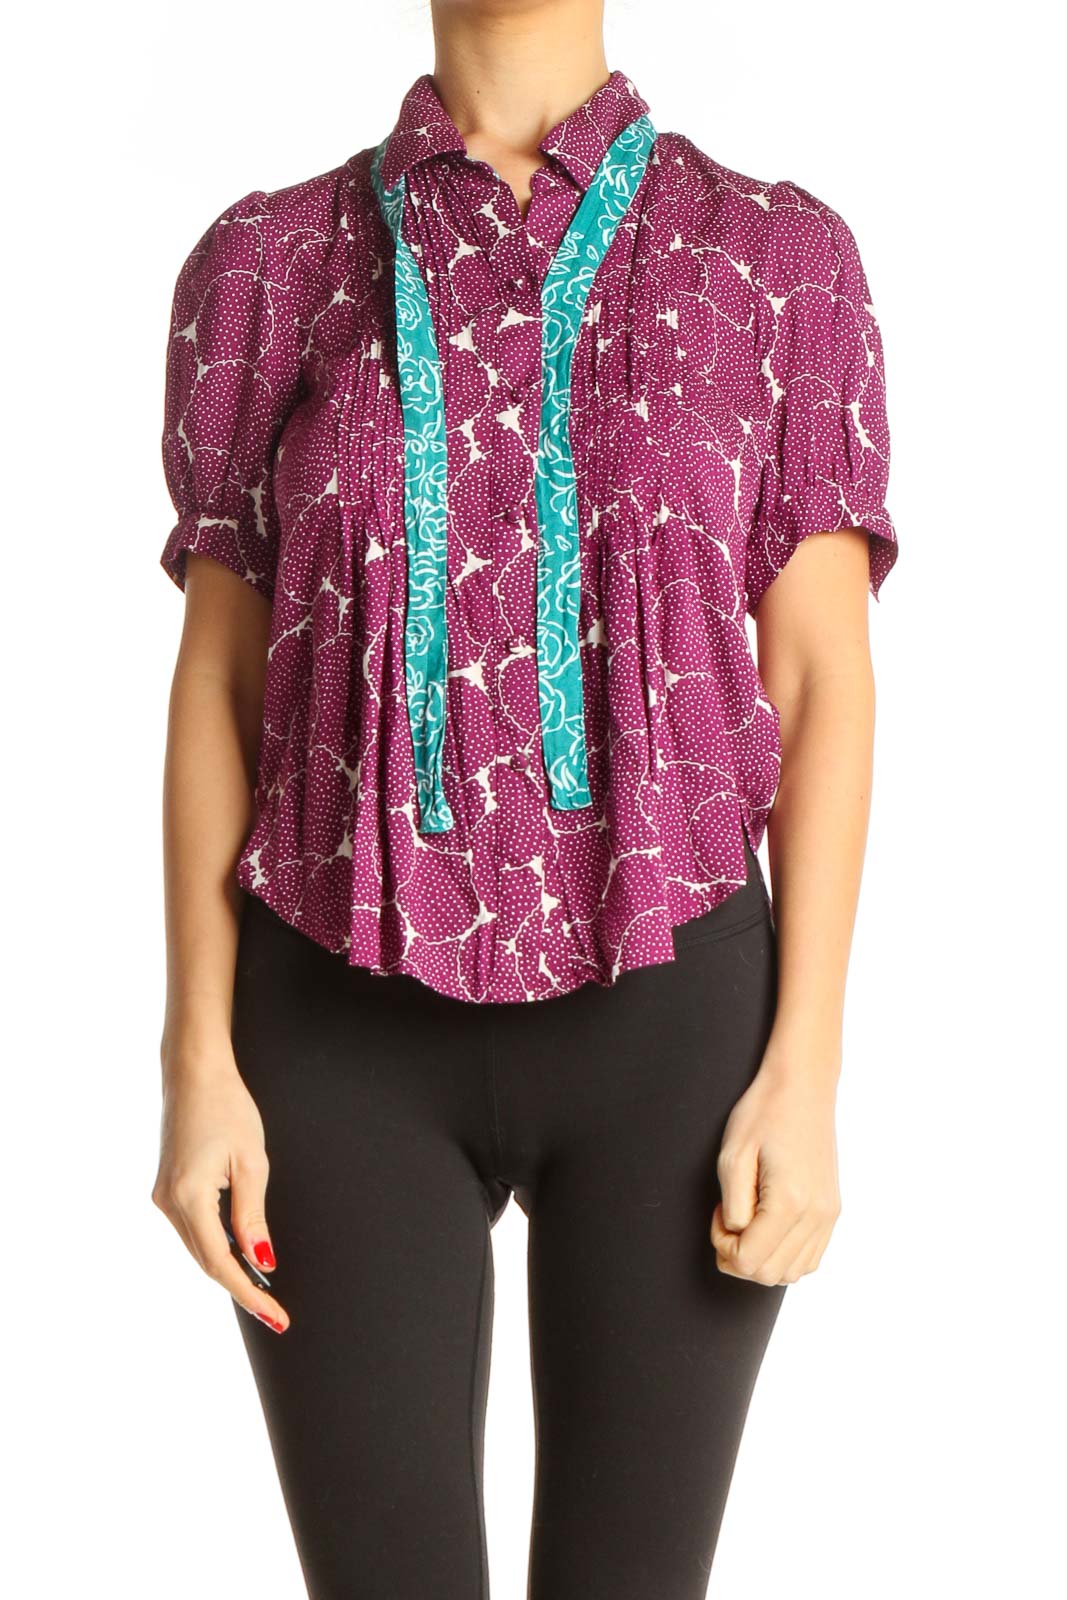 Purple Graphic Print All Day Wear Shirt Front